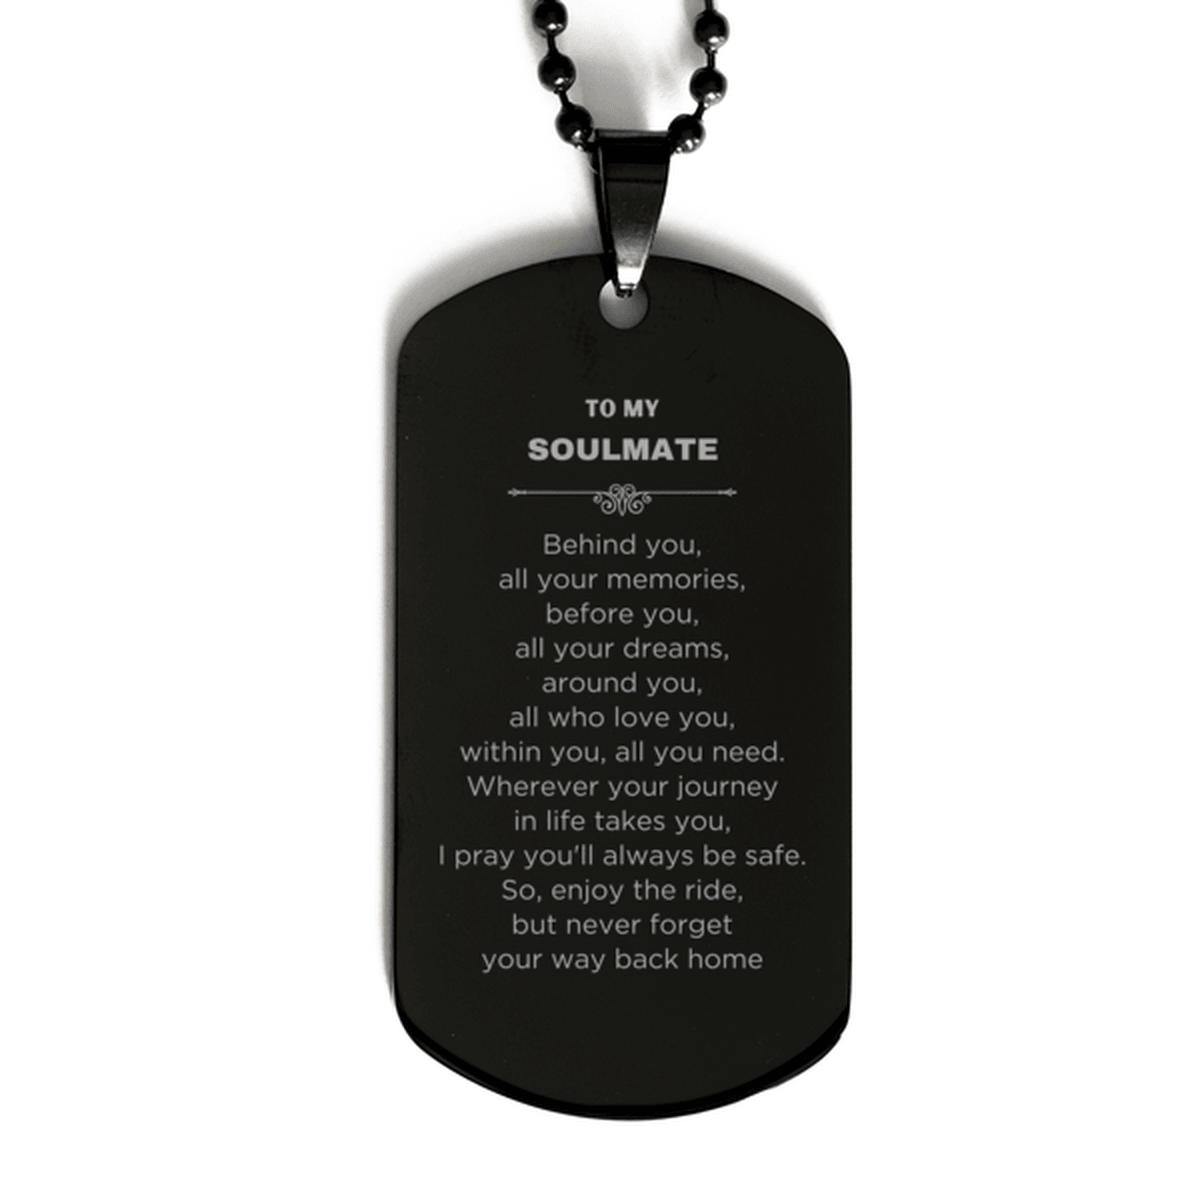 Inspirational Soulmate Engraved Black Dog Tag - Behind you, all your Memories, Before you, all your Dreams - Birthday, Christmas Holiday Gifts - Mallard Moon Gift Shop